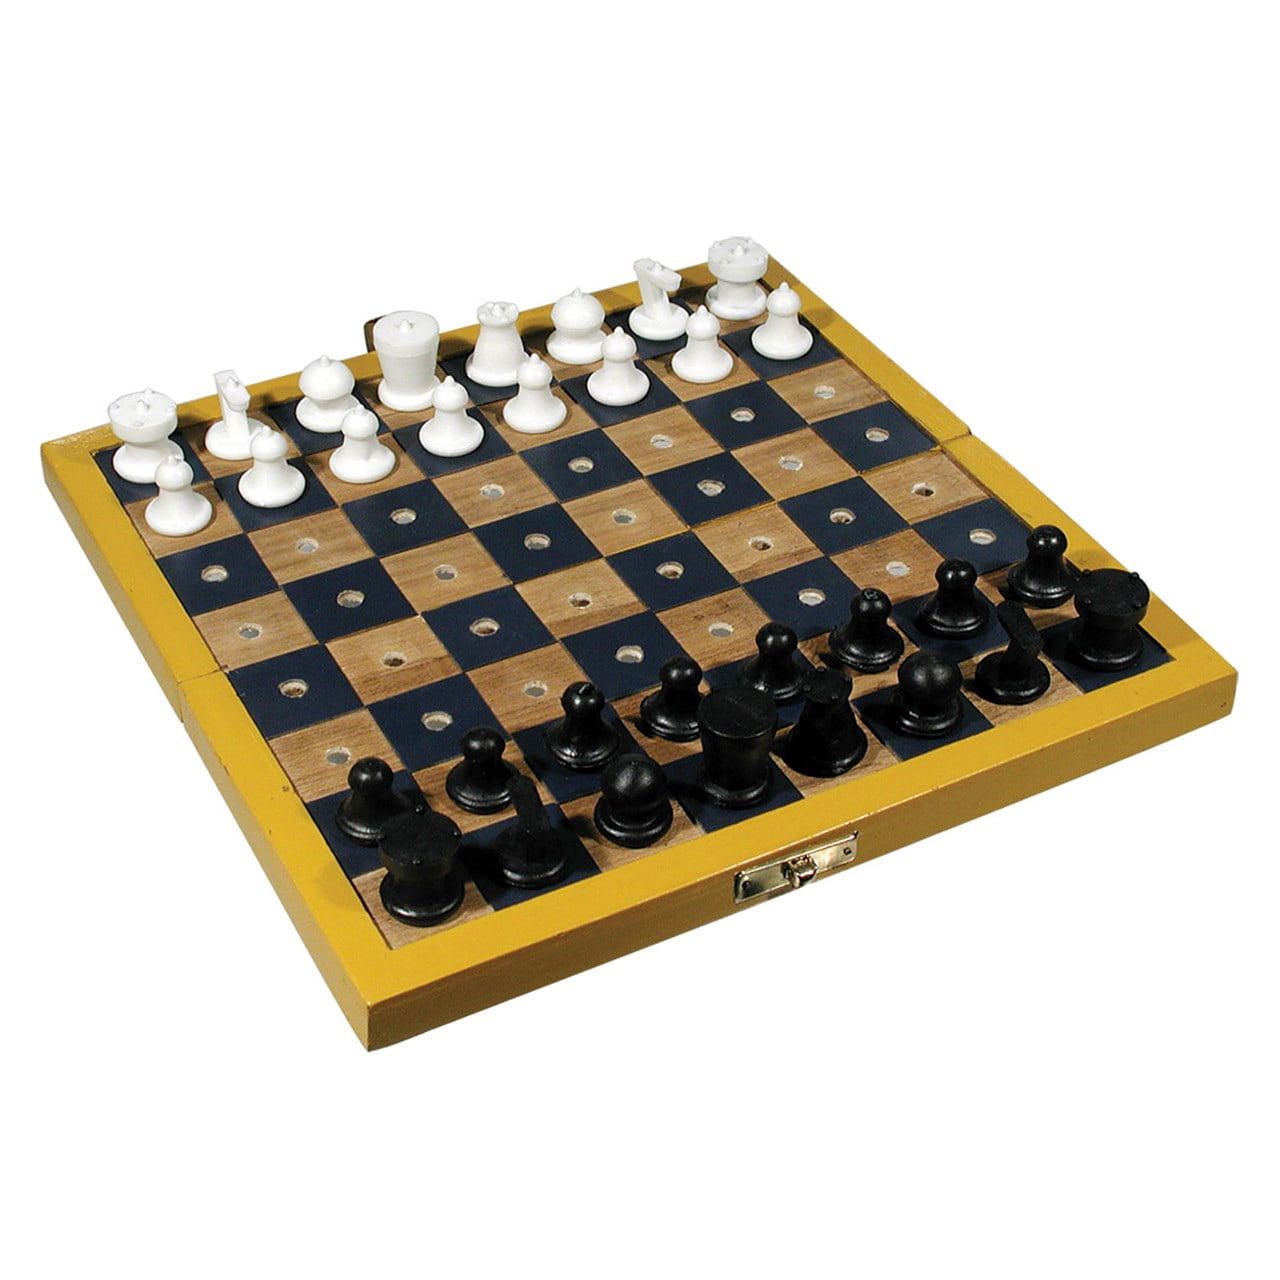 Medieval Wooden Chess Set Tournament Chess With Vinyl Chessboard Board Game 8x8